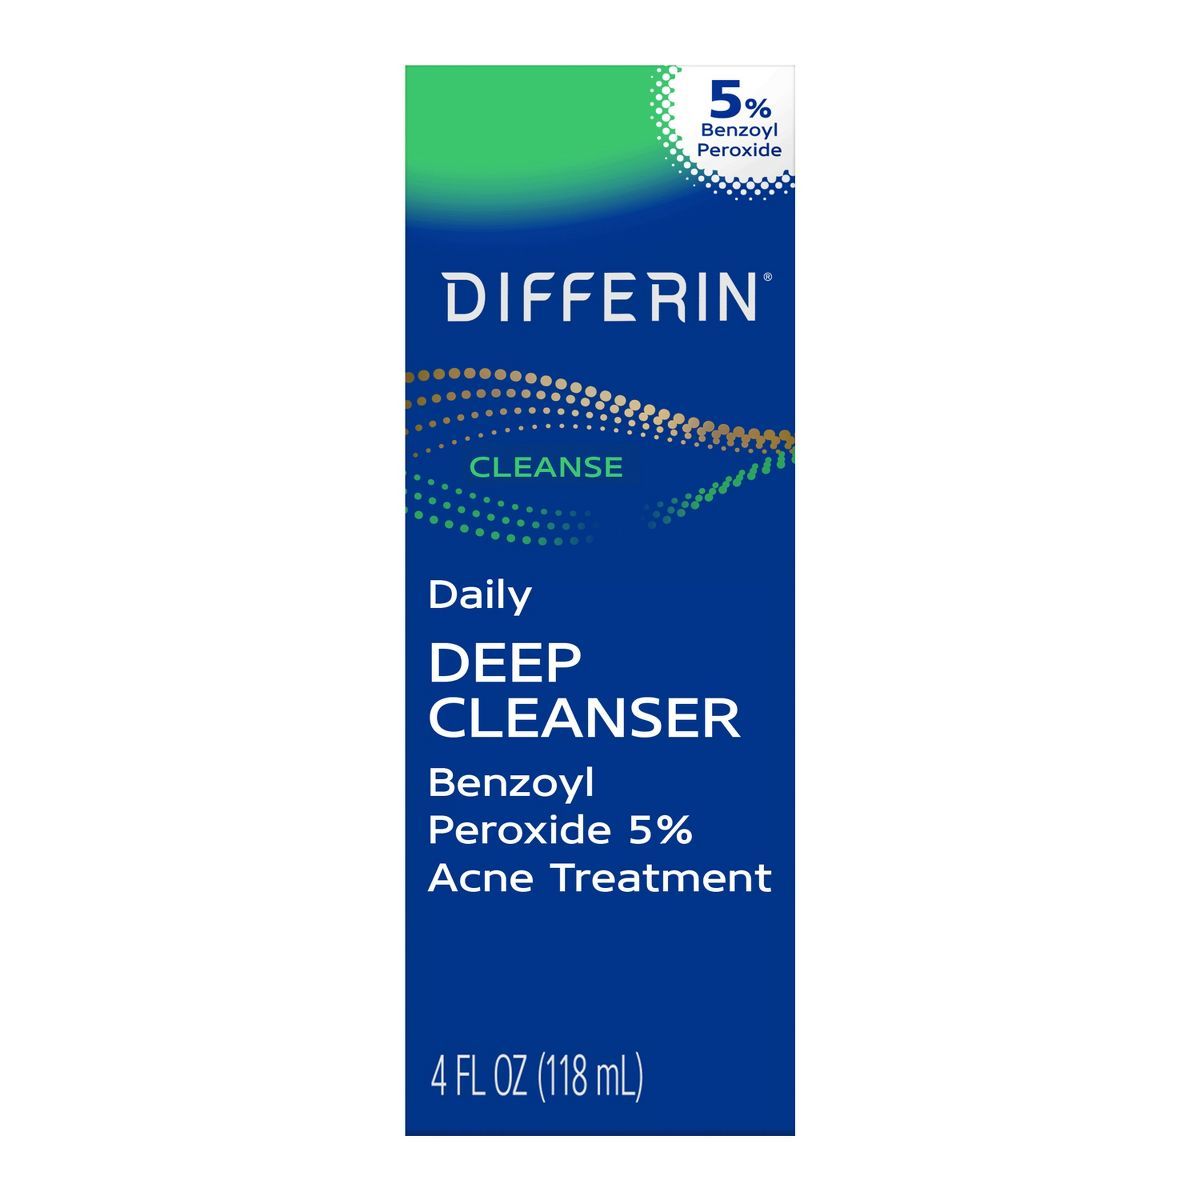 Differin Daily Deep Cleanser Acne Face Wash with Benzoyl Peroxide - 4 fl oz | Target